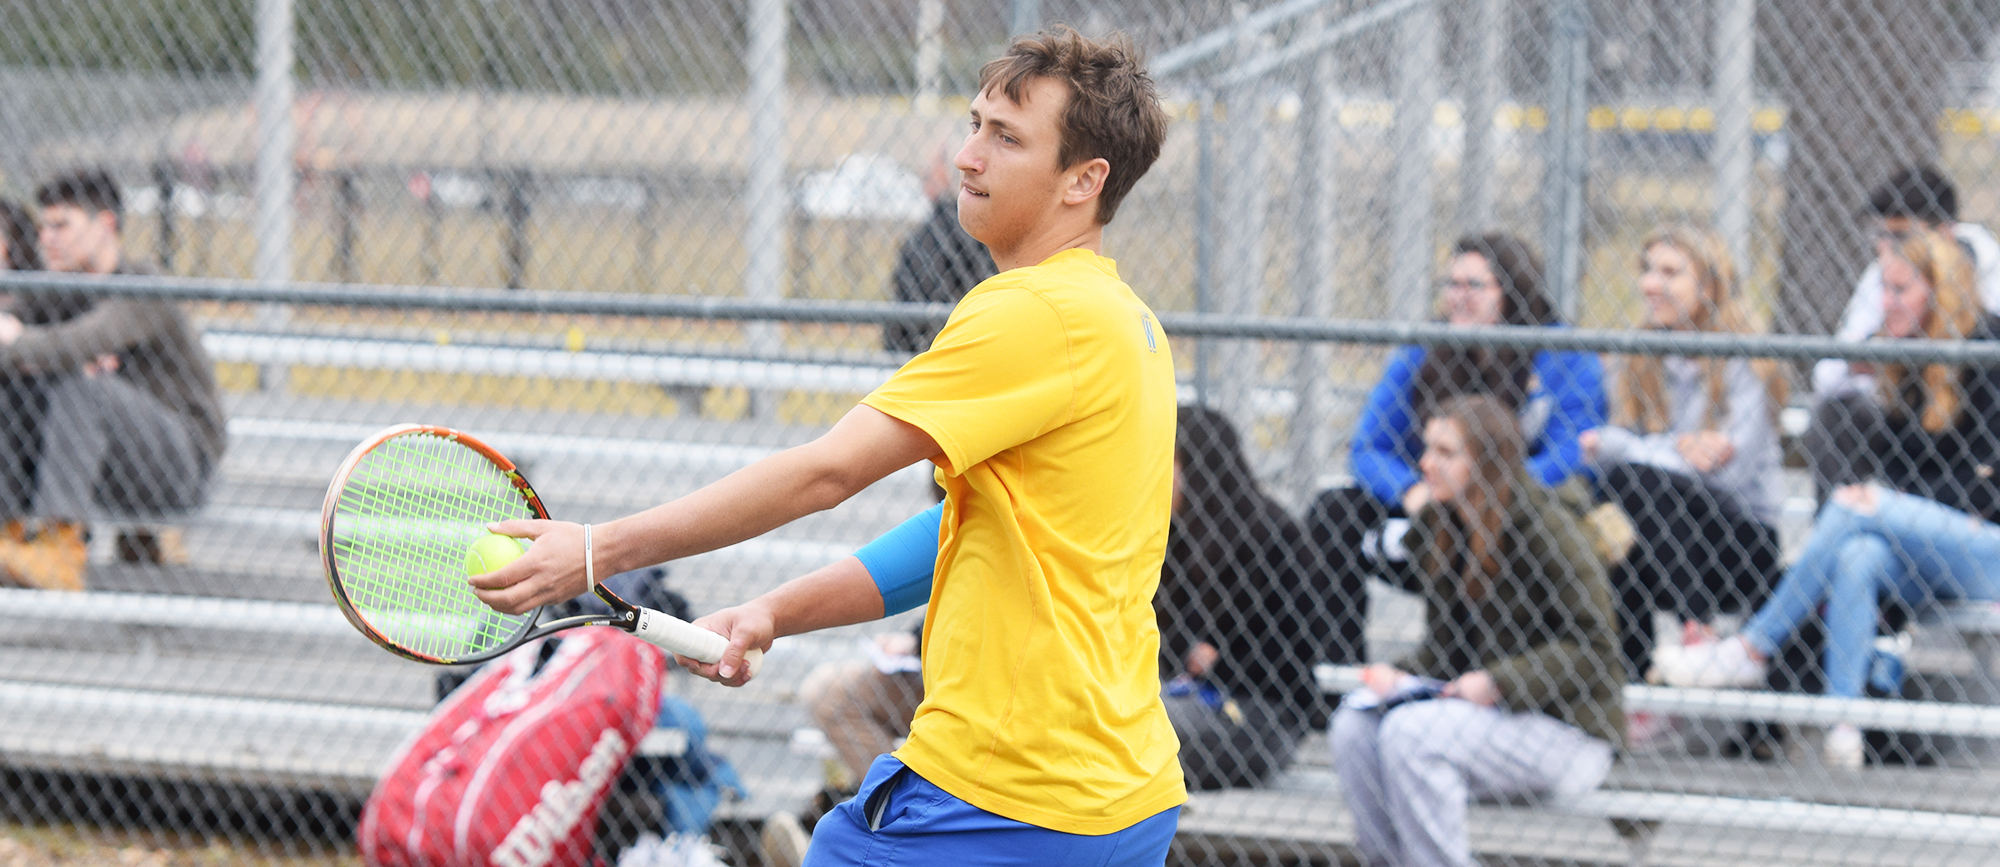 Sophomore Luke Surawski won at No. 2 singles and No. 2 doubles as the Golden Bears opened CCC play with an 8-1 triumph over Wentworth on Tuesday. (Photo by Rachael Margossian)